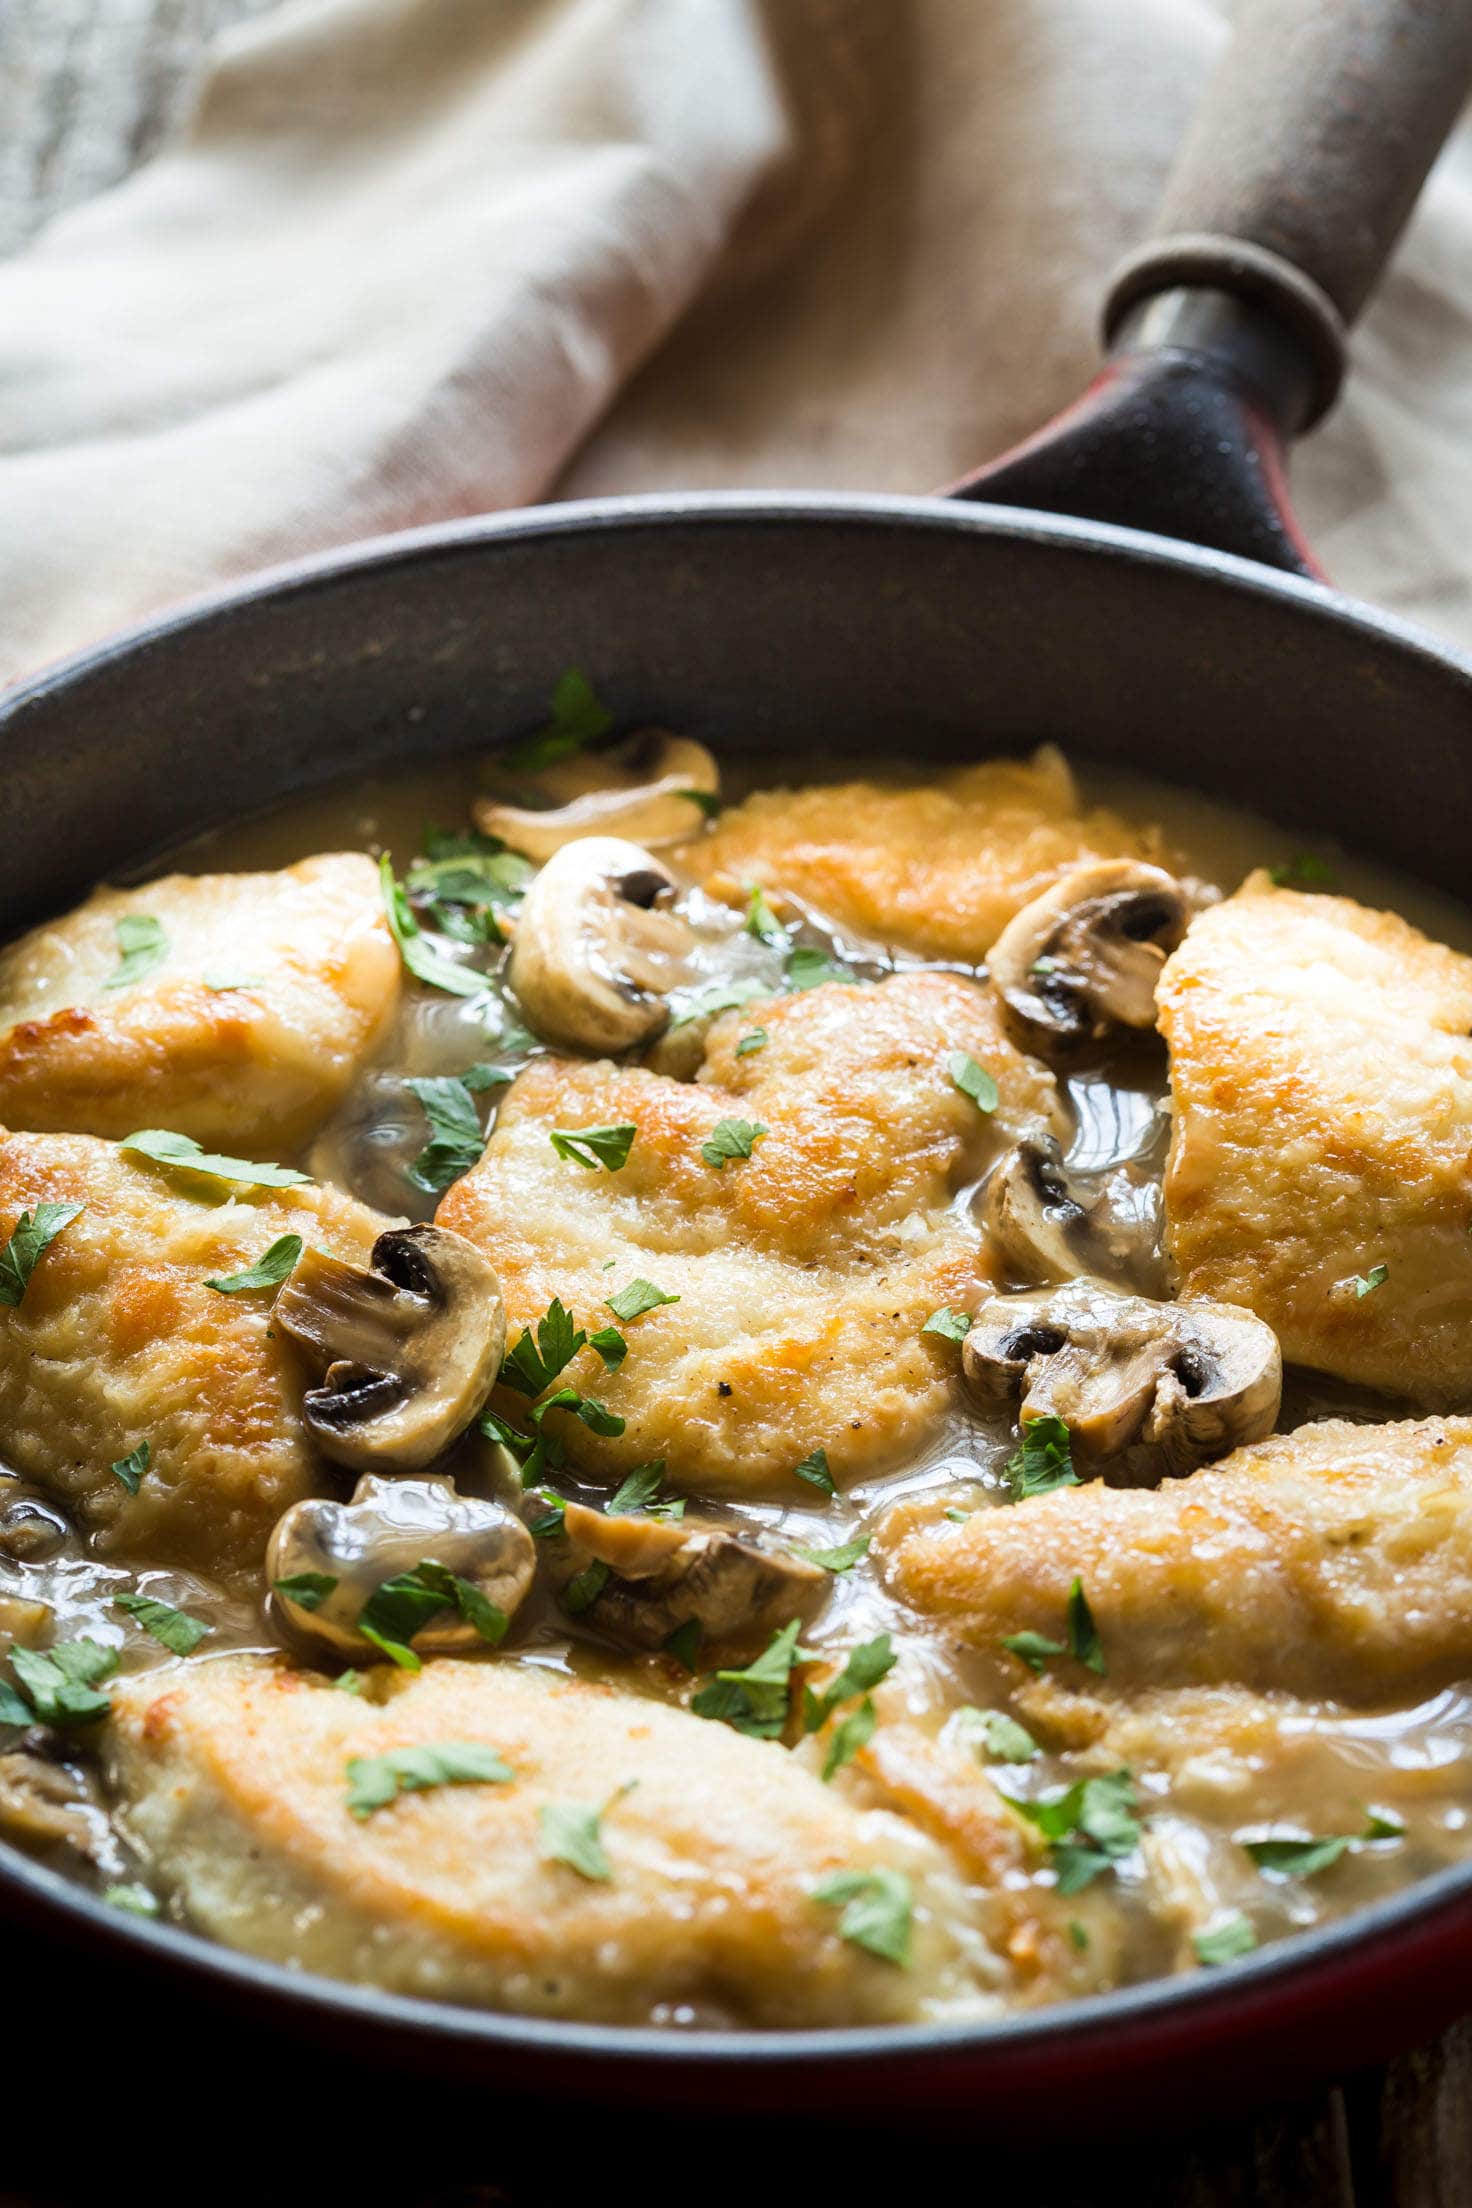 30 Minute Paleo Chicken Marsala recipe made with chicken, mushrooms, marsala wine, chicken broth and garnished with parsley. Thickened with arrowroot (or use cornstarch if you are not paleo) and you can serve it over mashed potatoes or zoodles